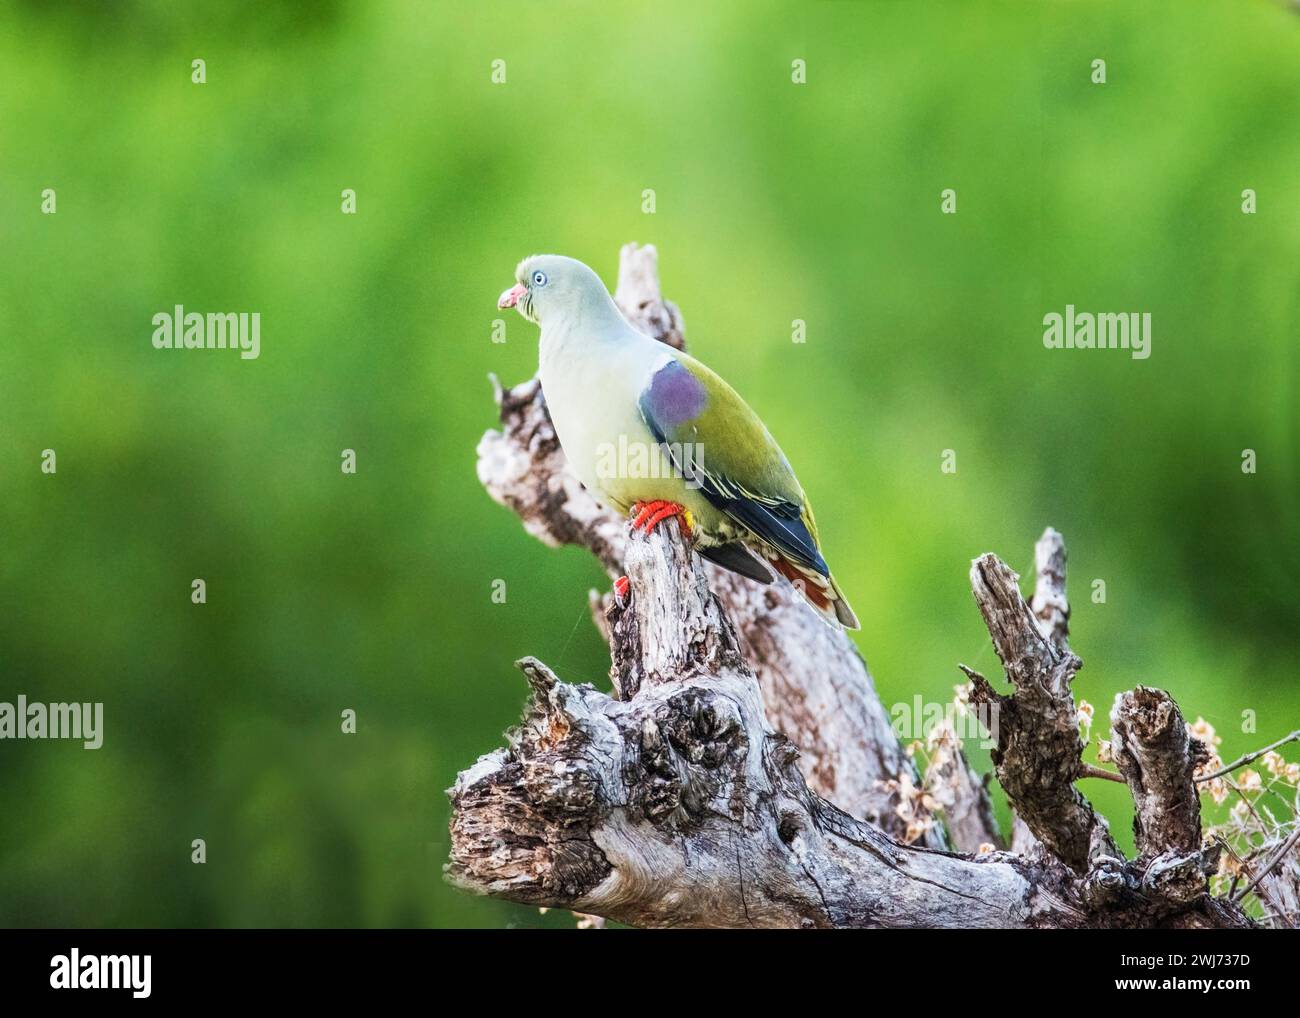 African Green Pigeon Kruger National Park Stock Photo